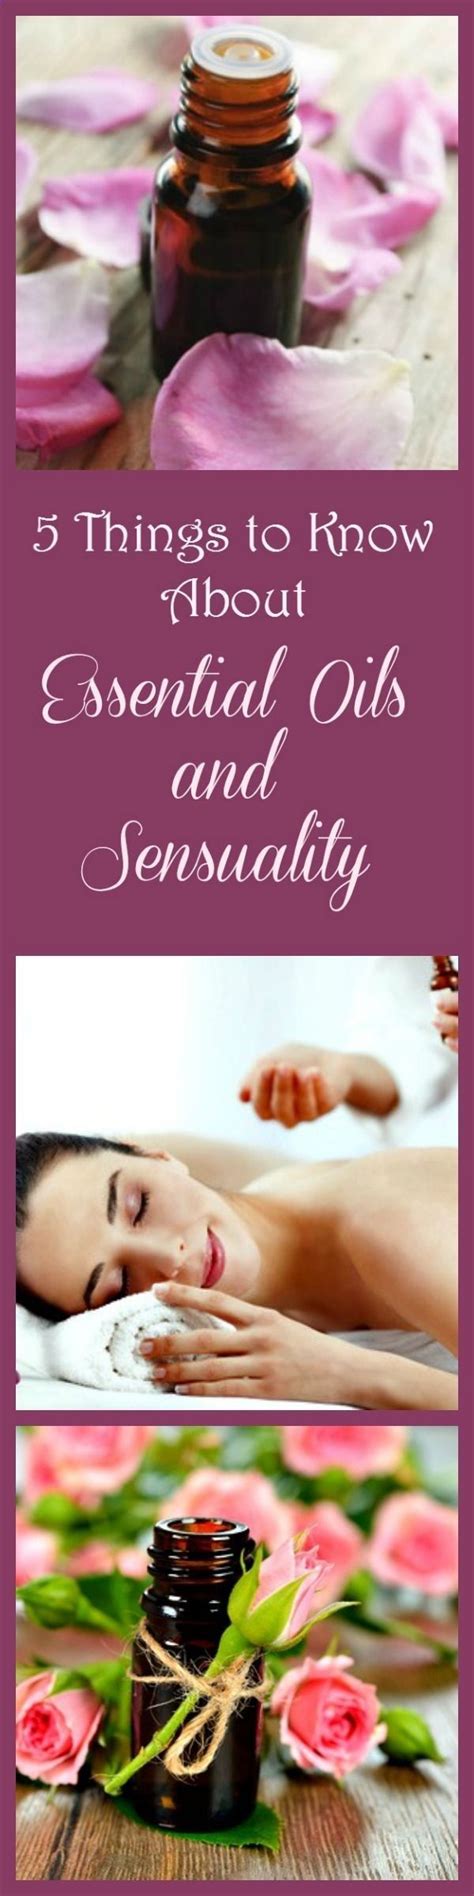 Essential Oils For Love And Romance Oils And Natural Scents Have Been